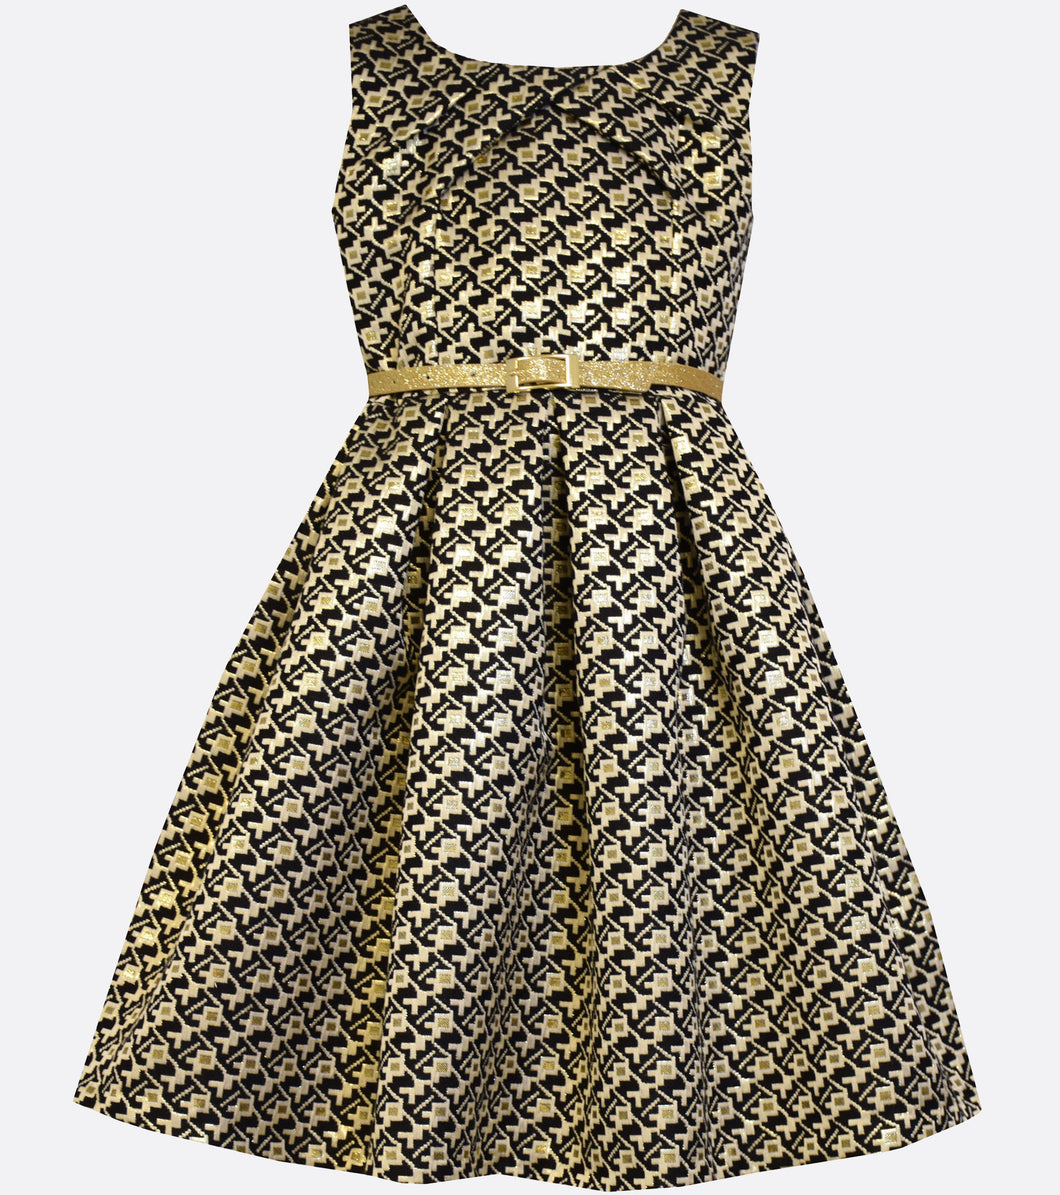 Bonnie Jean black and gold brocade pleated dress.